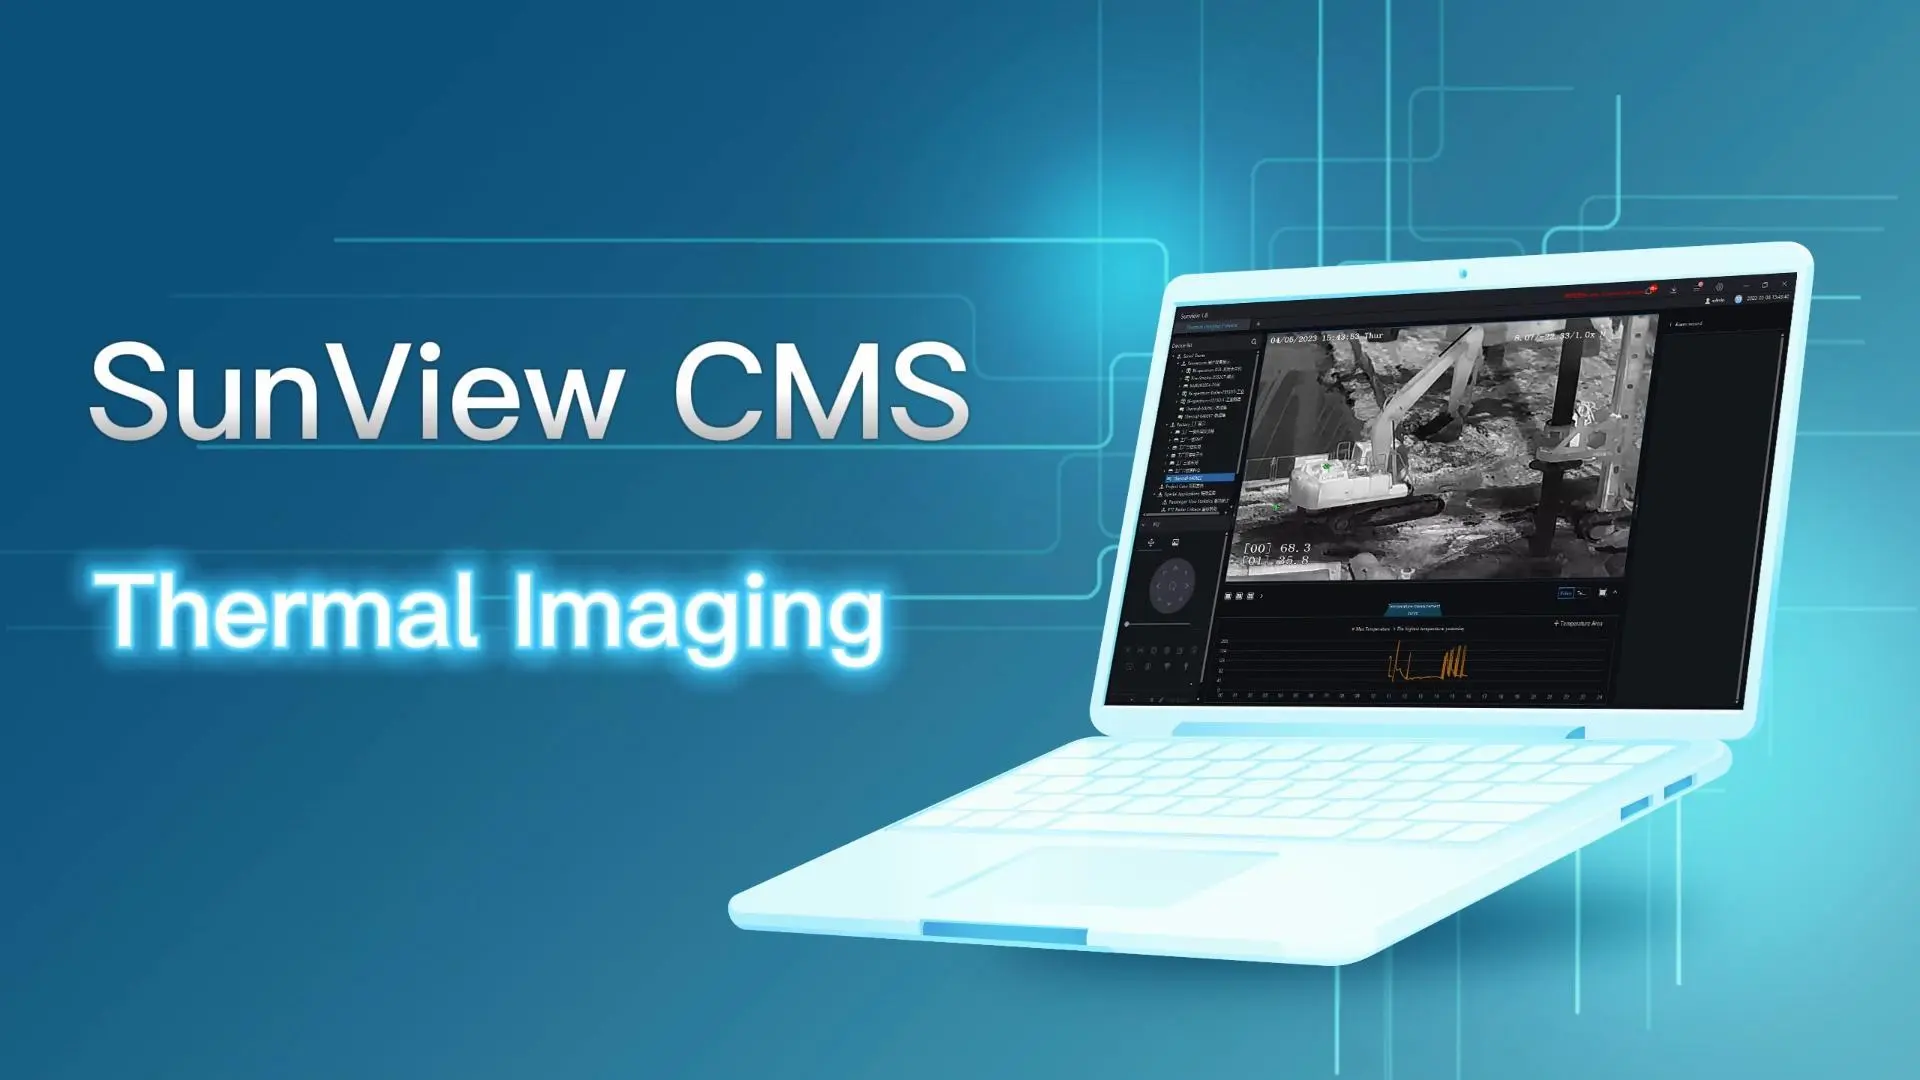 Sunell SunView CMS - Thermal Imaging Introducing - 翻译中...